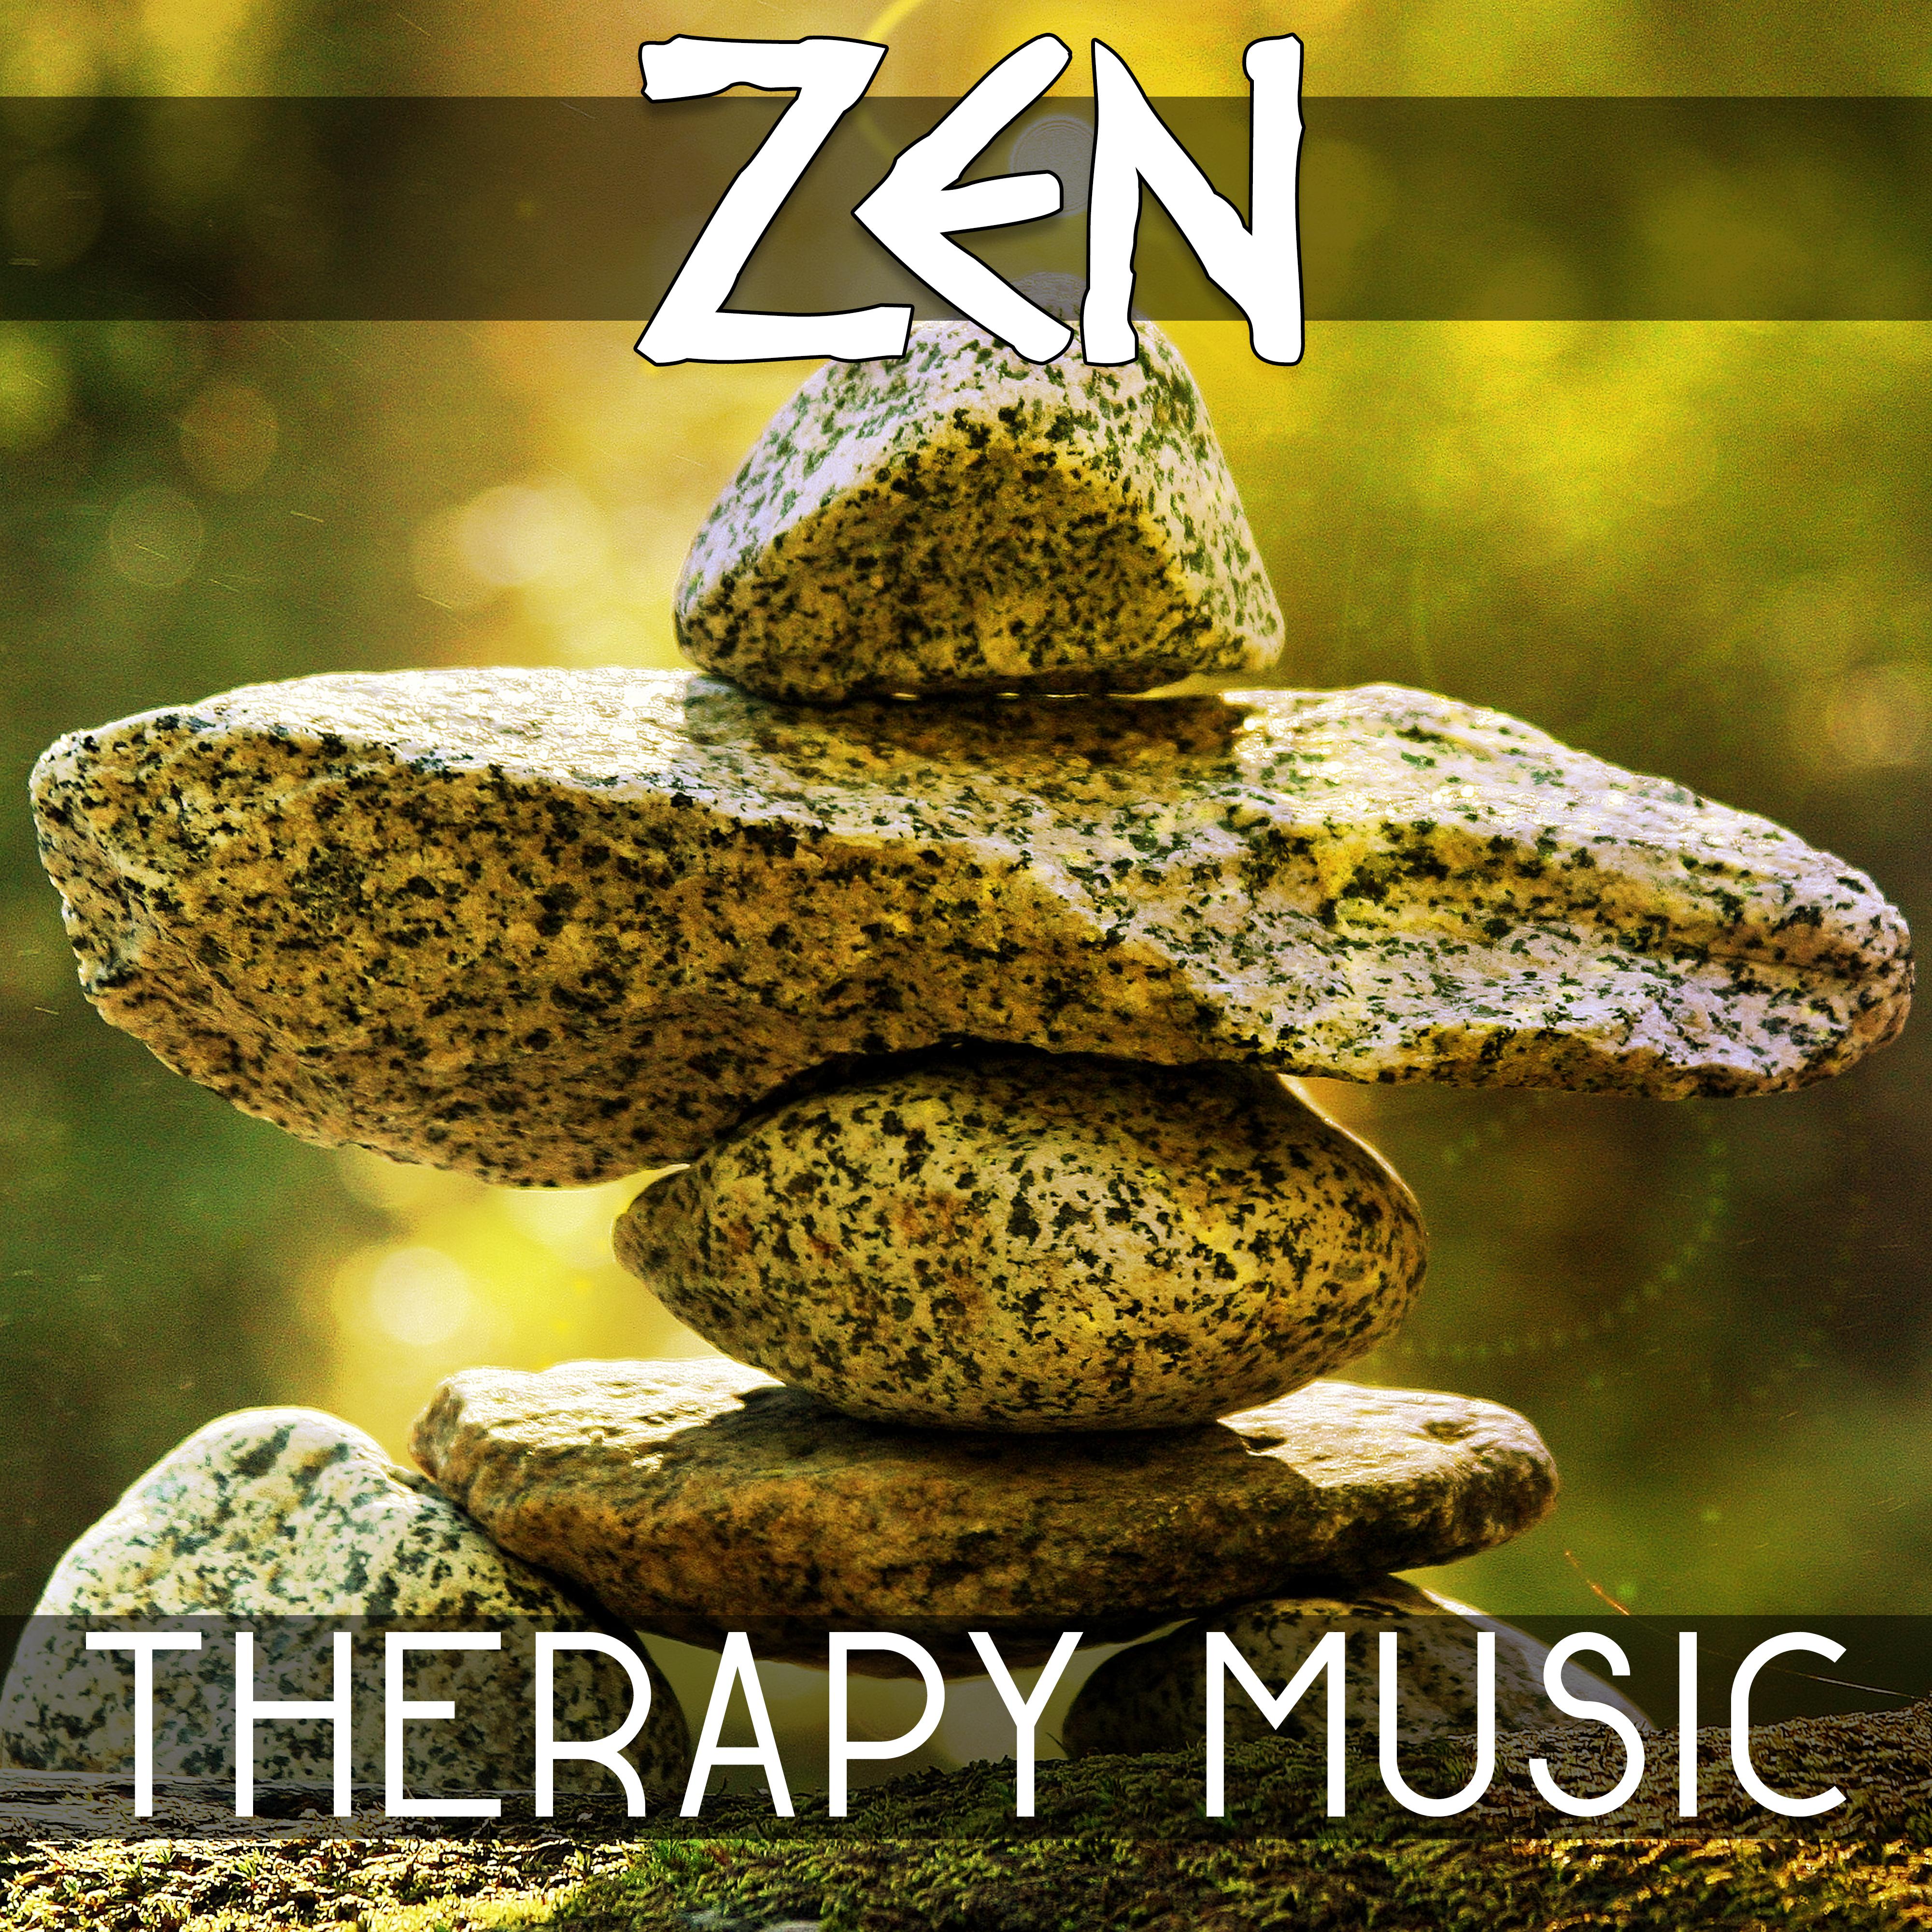 Zen Therapy Music – Peaceful Music for Relax, Meditate, Sleep, Reiki, Natural Sounds